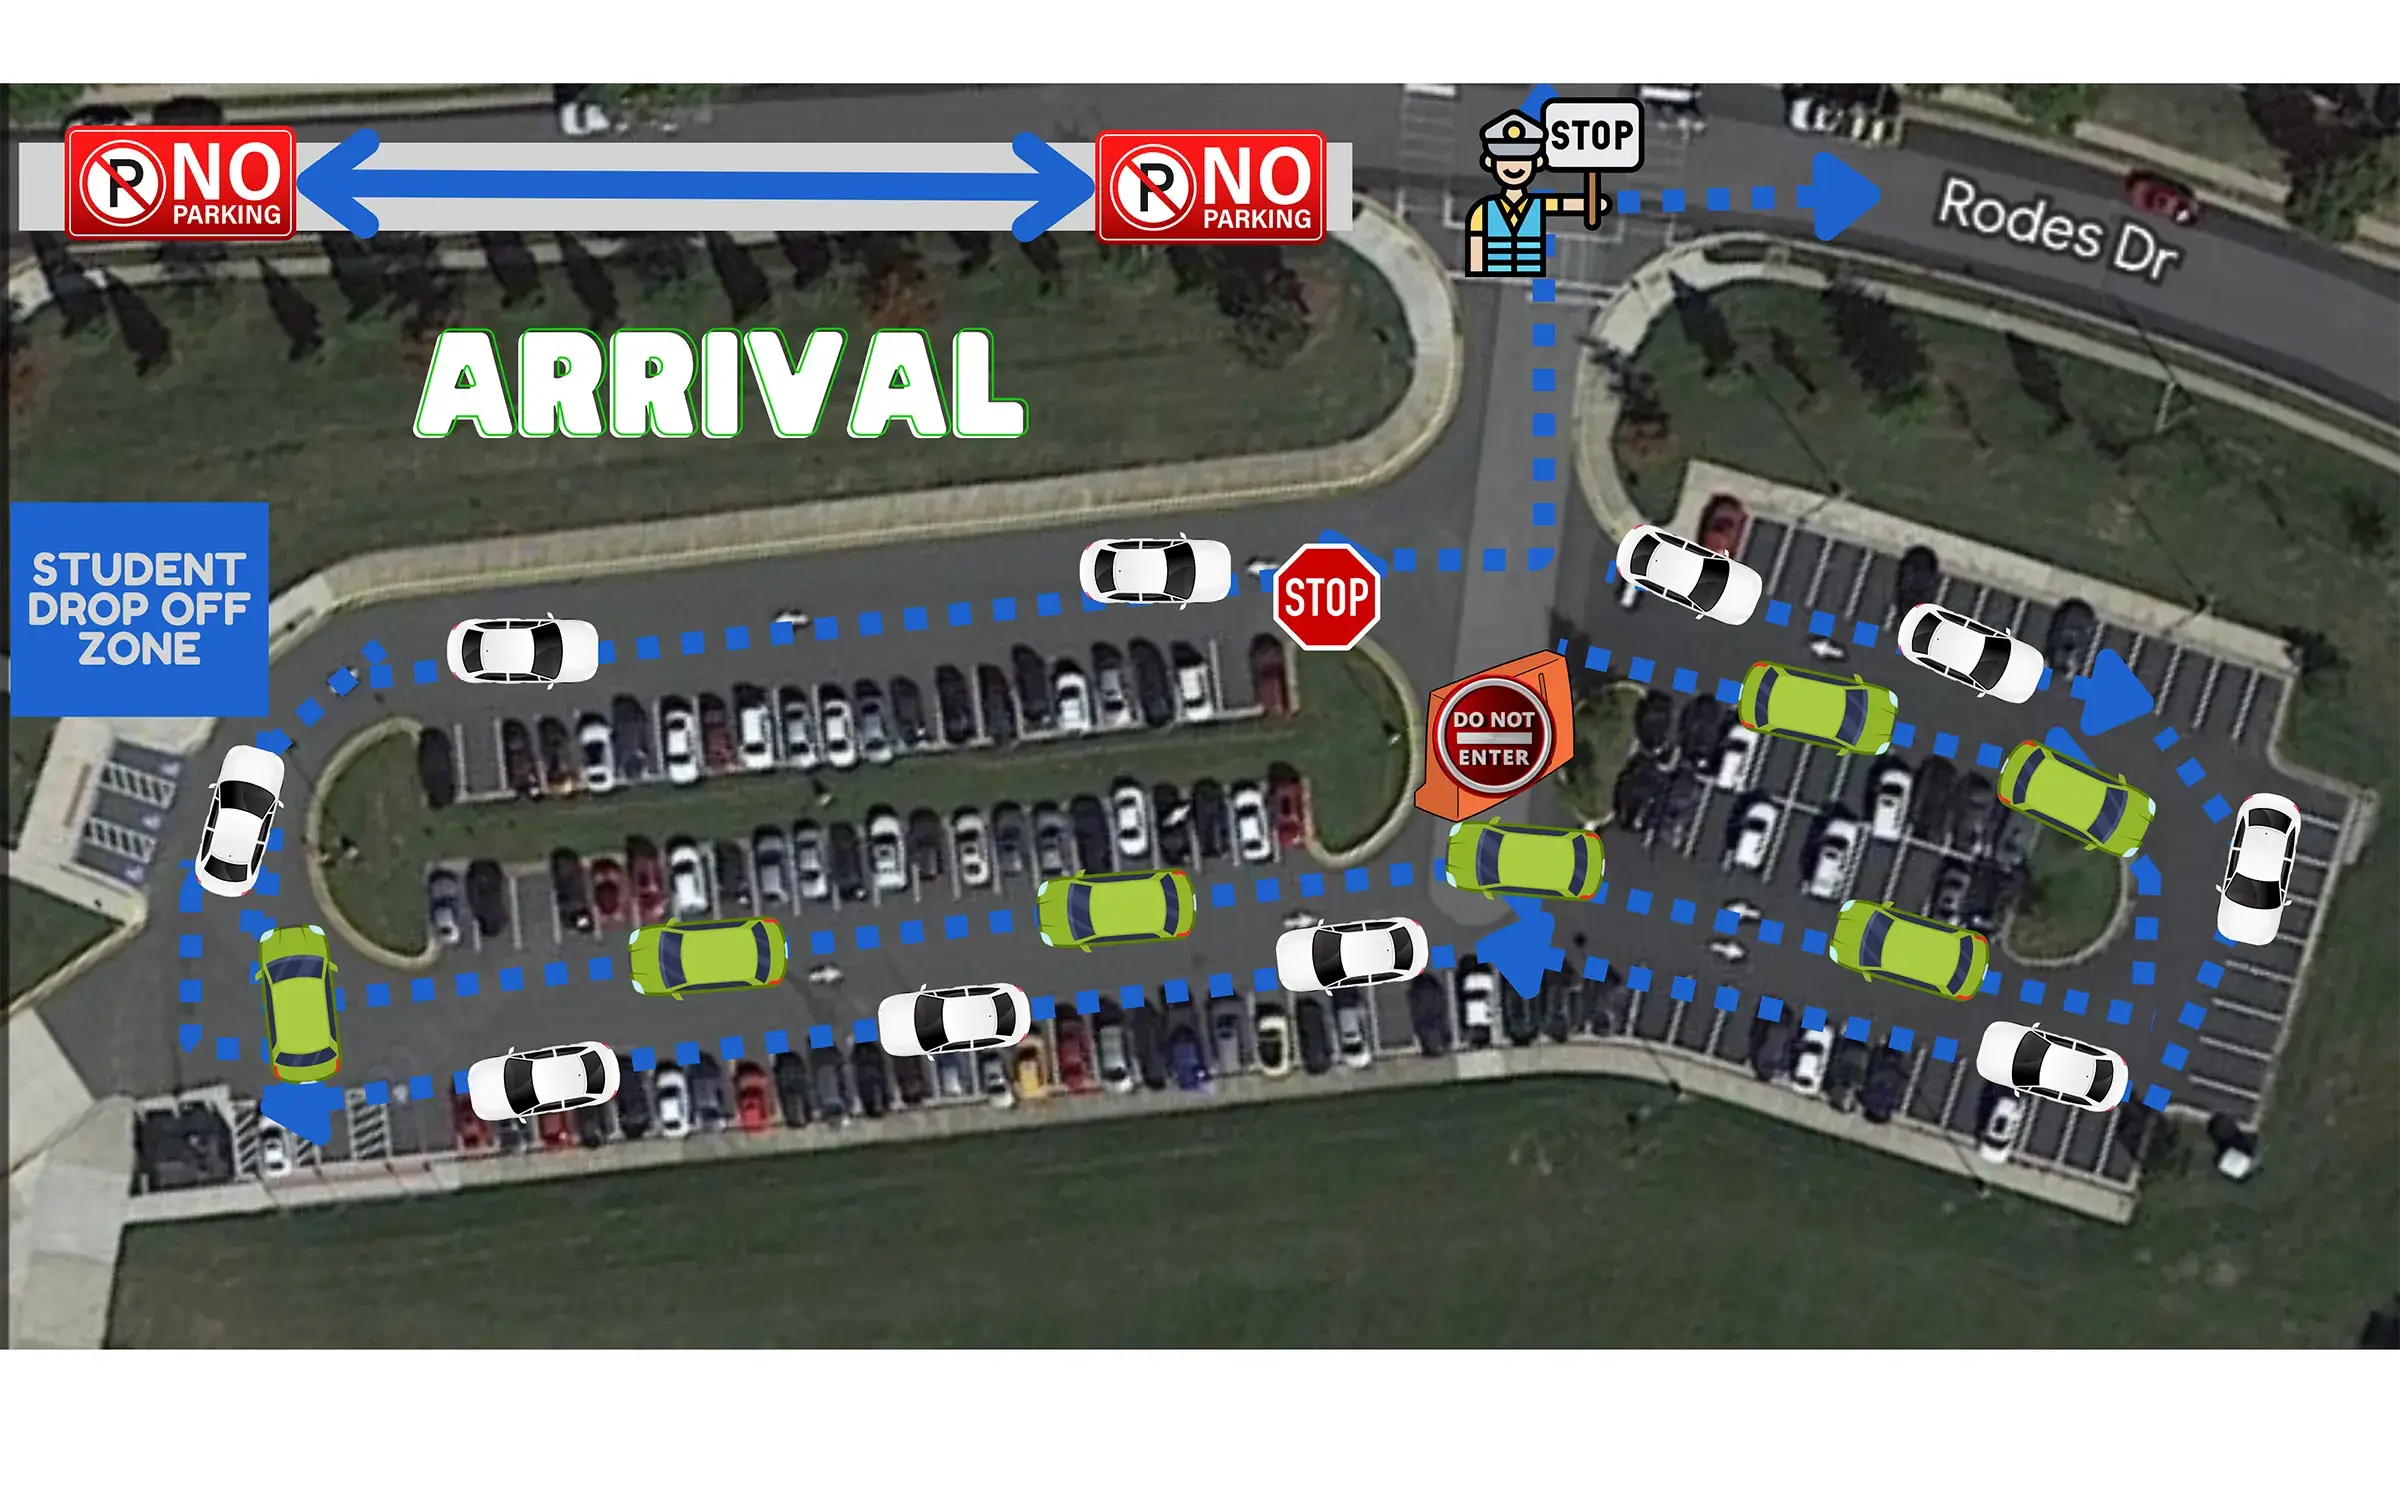 Car map for arrival